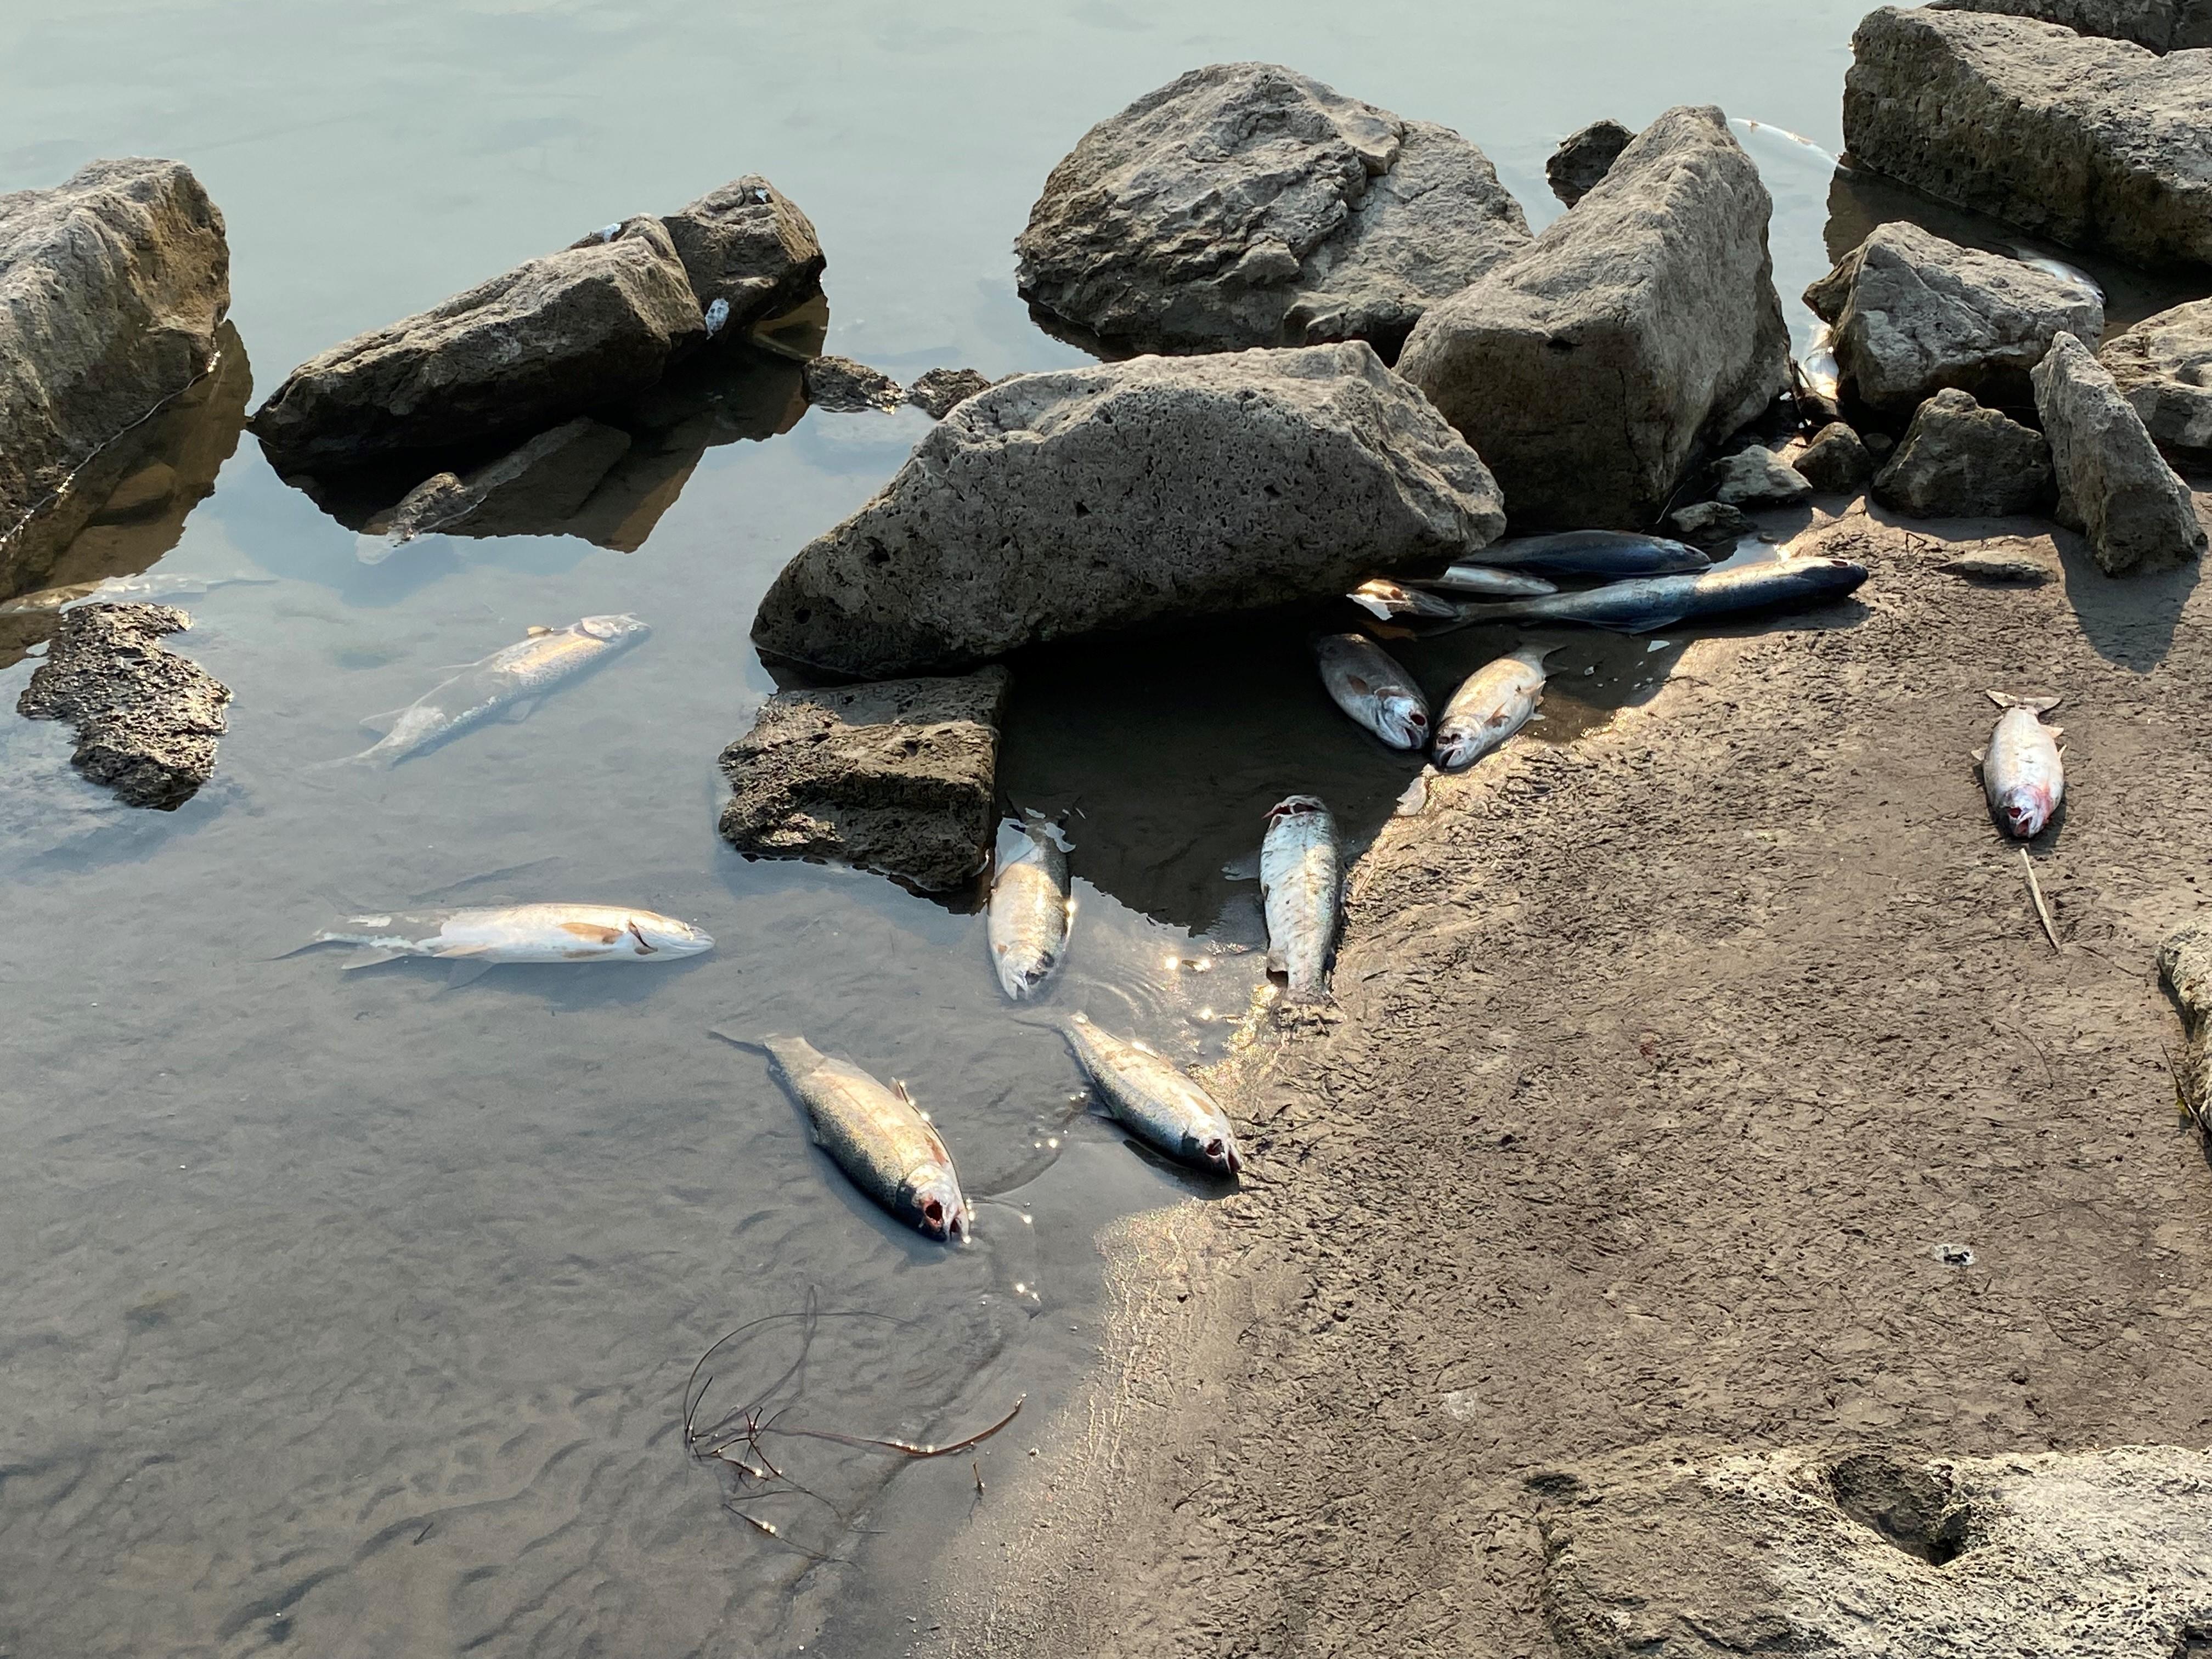 Dead trout lying in water and on a sandy shore near some large boulders.